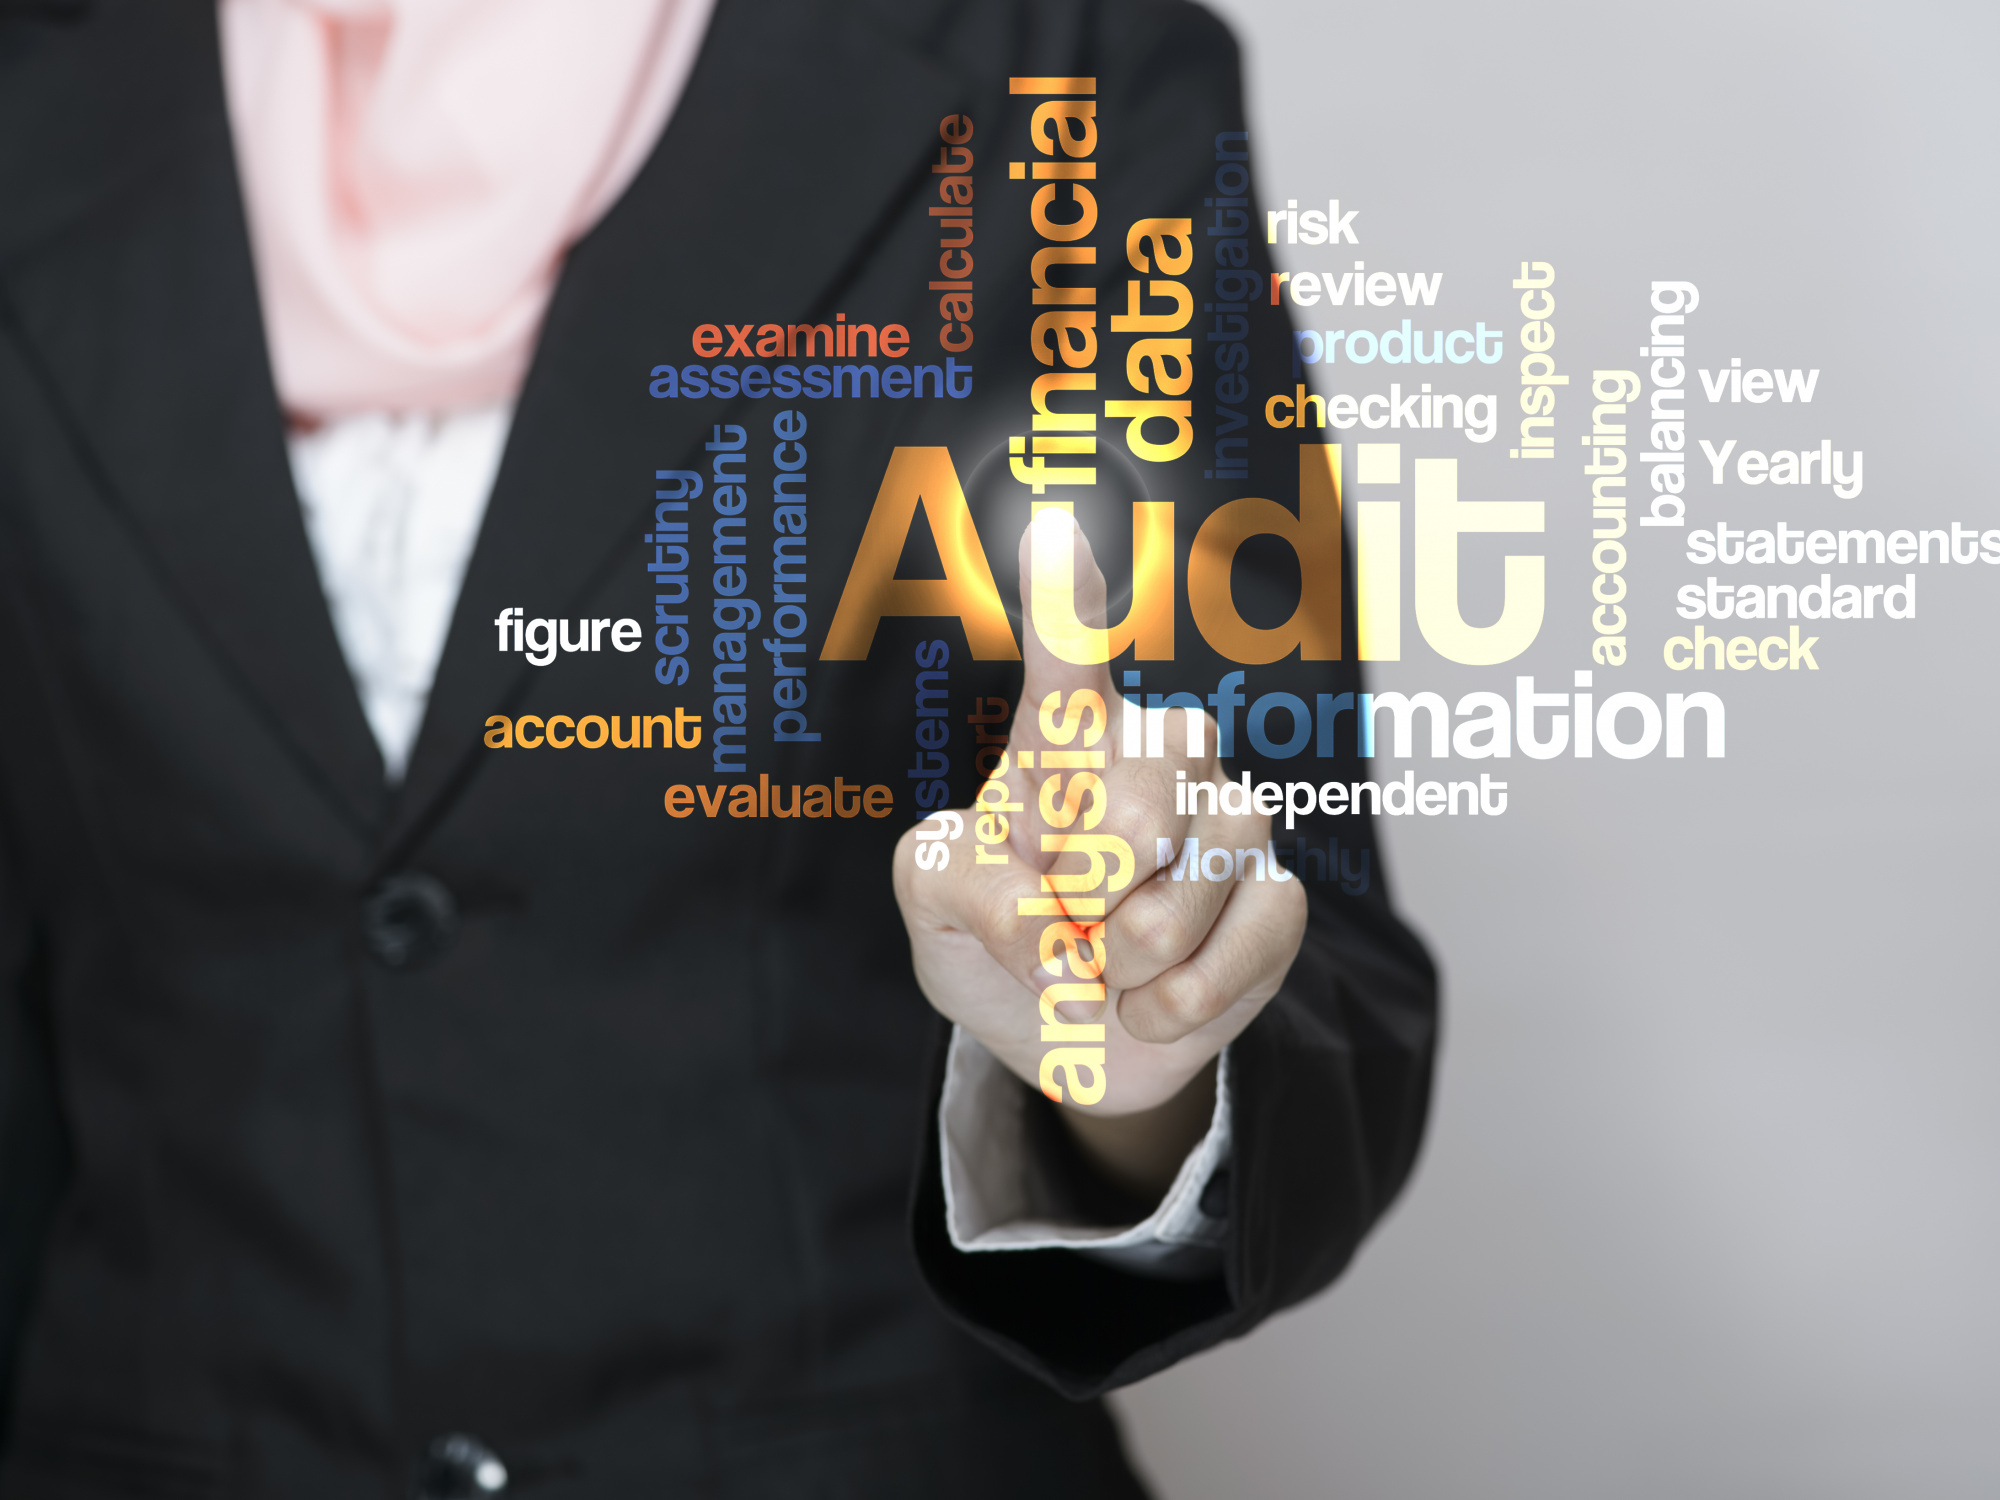 word cloud of various terms including "audit" (largest), "information",  "analysis", "account", and other related terms